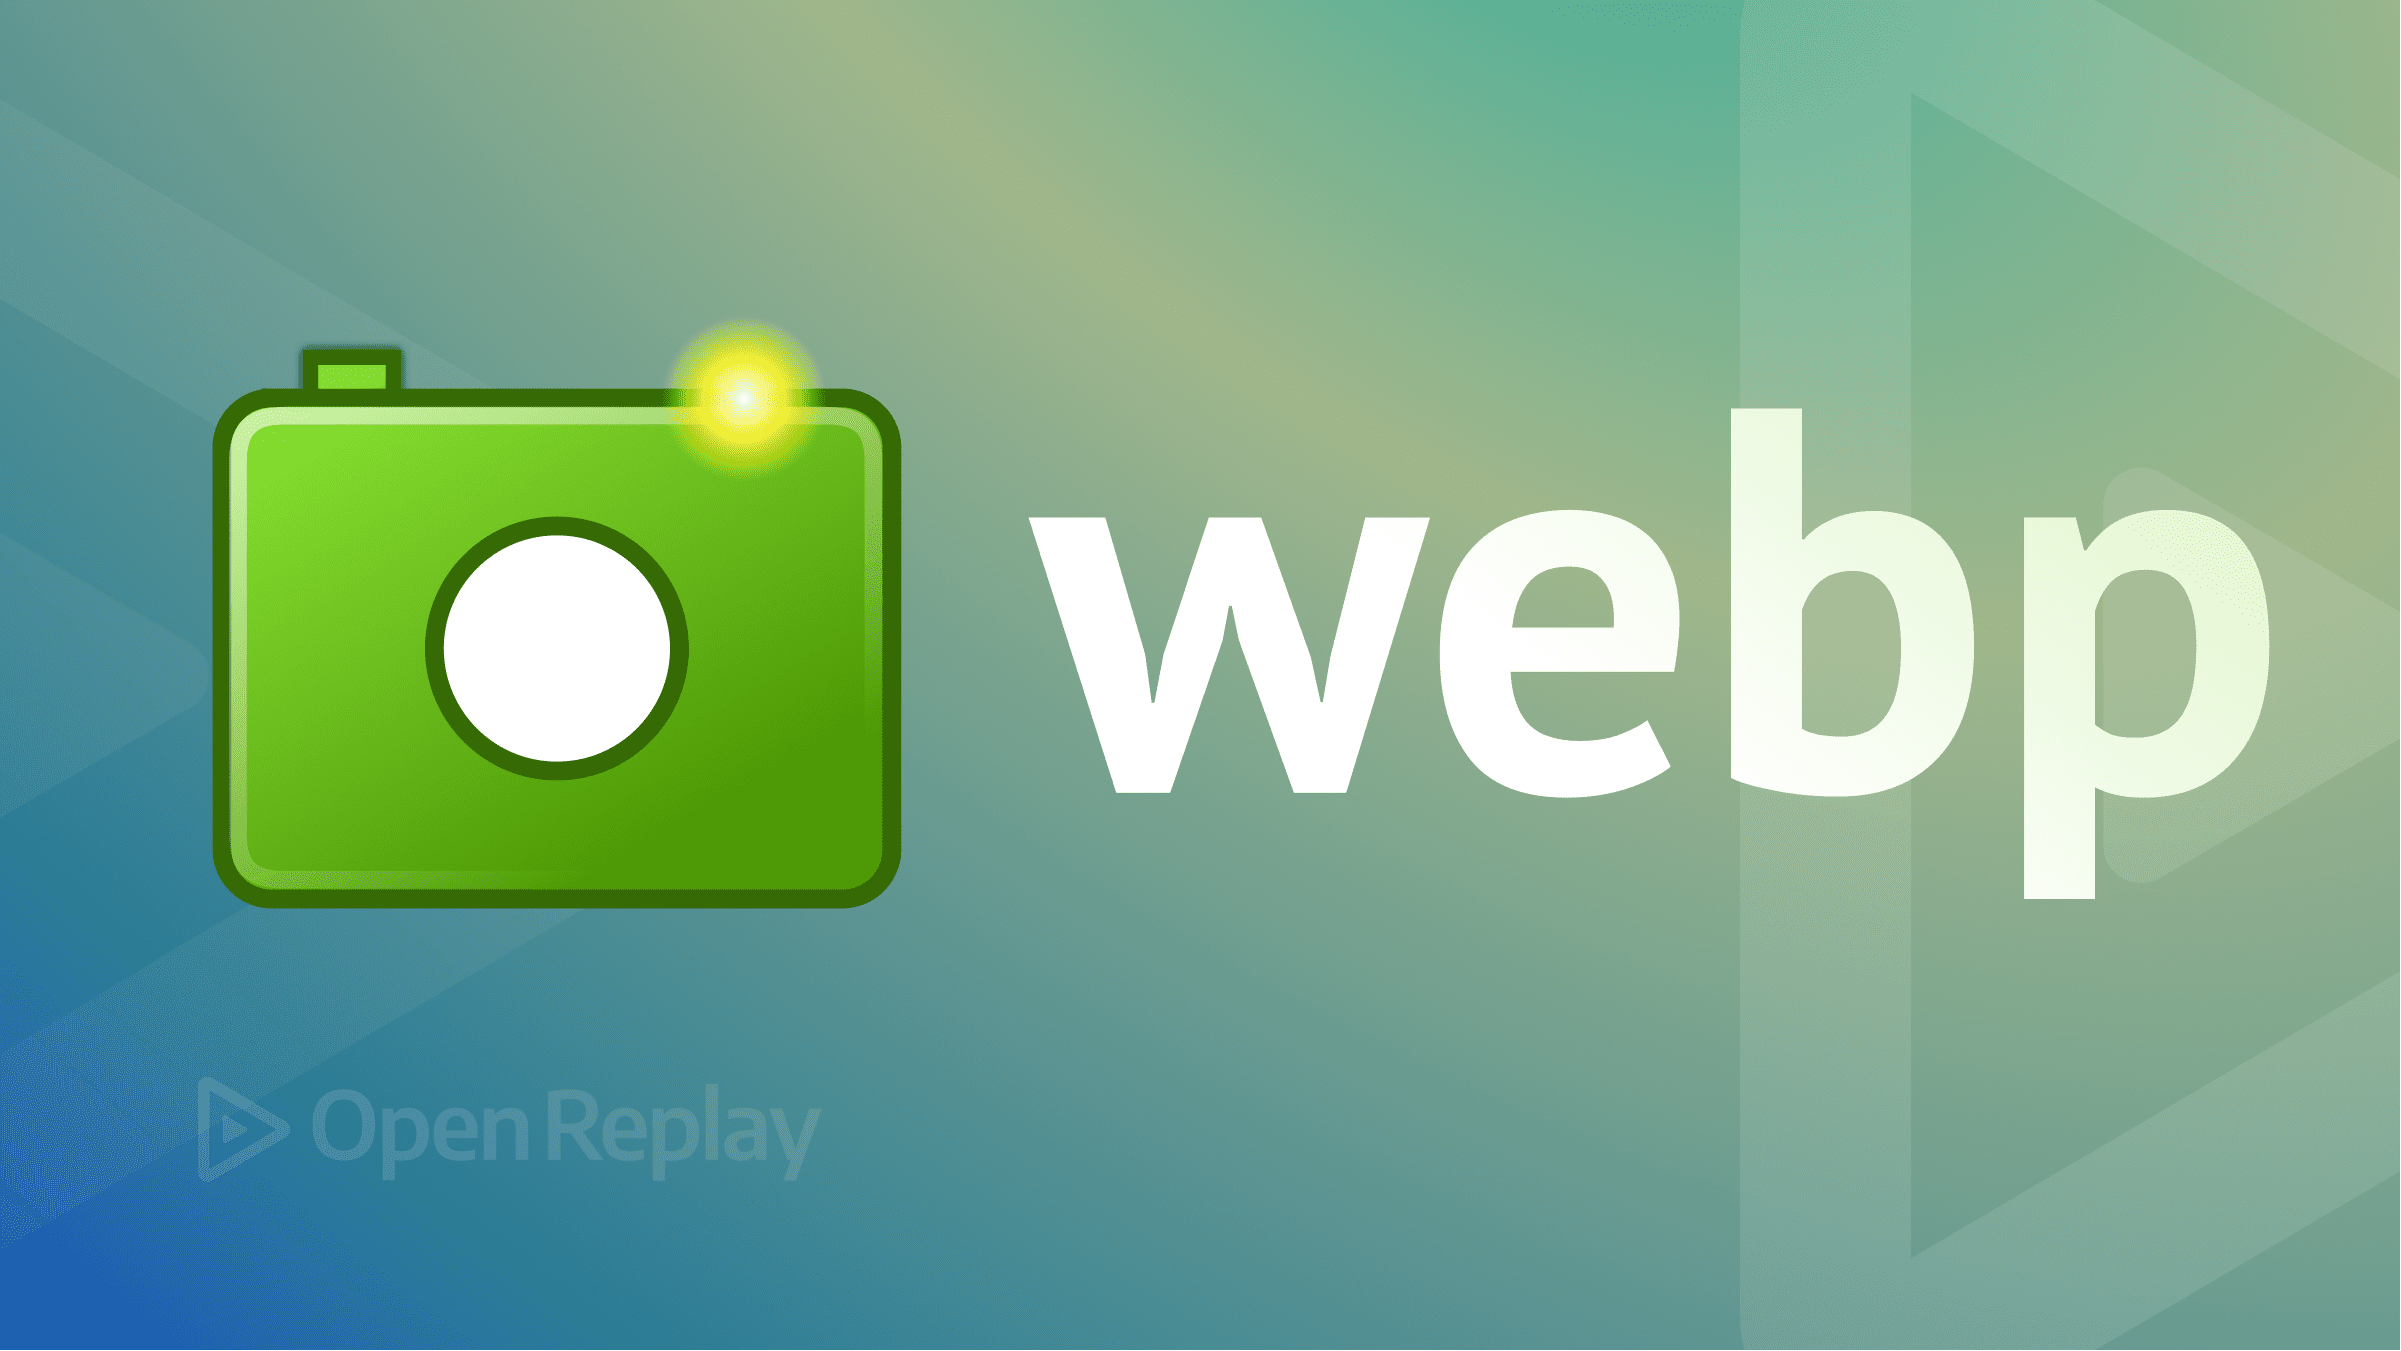 Working with WebP images